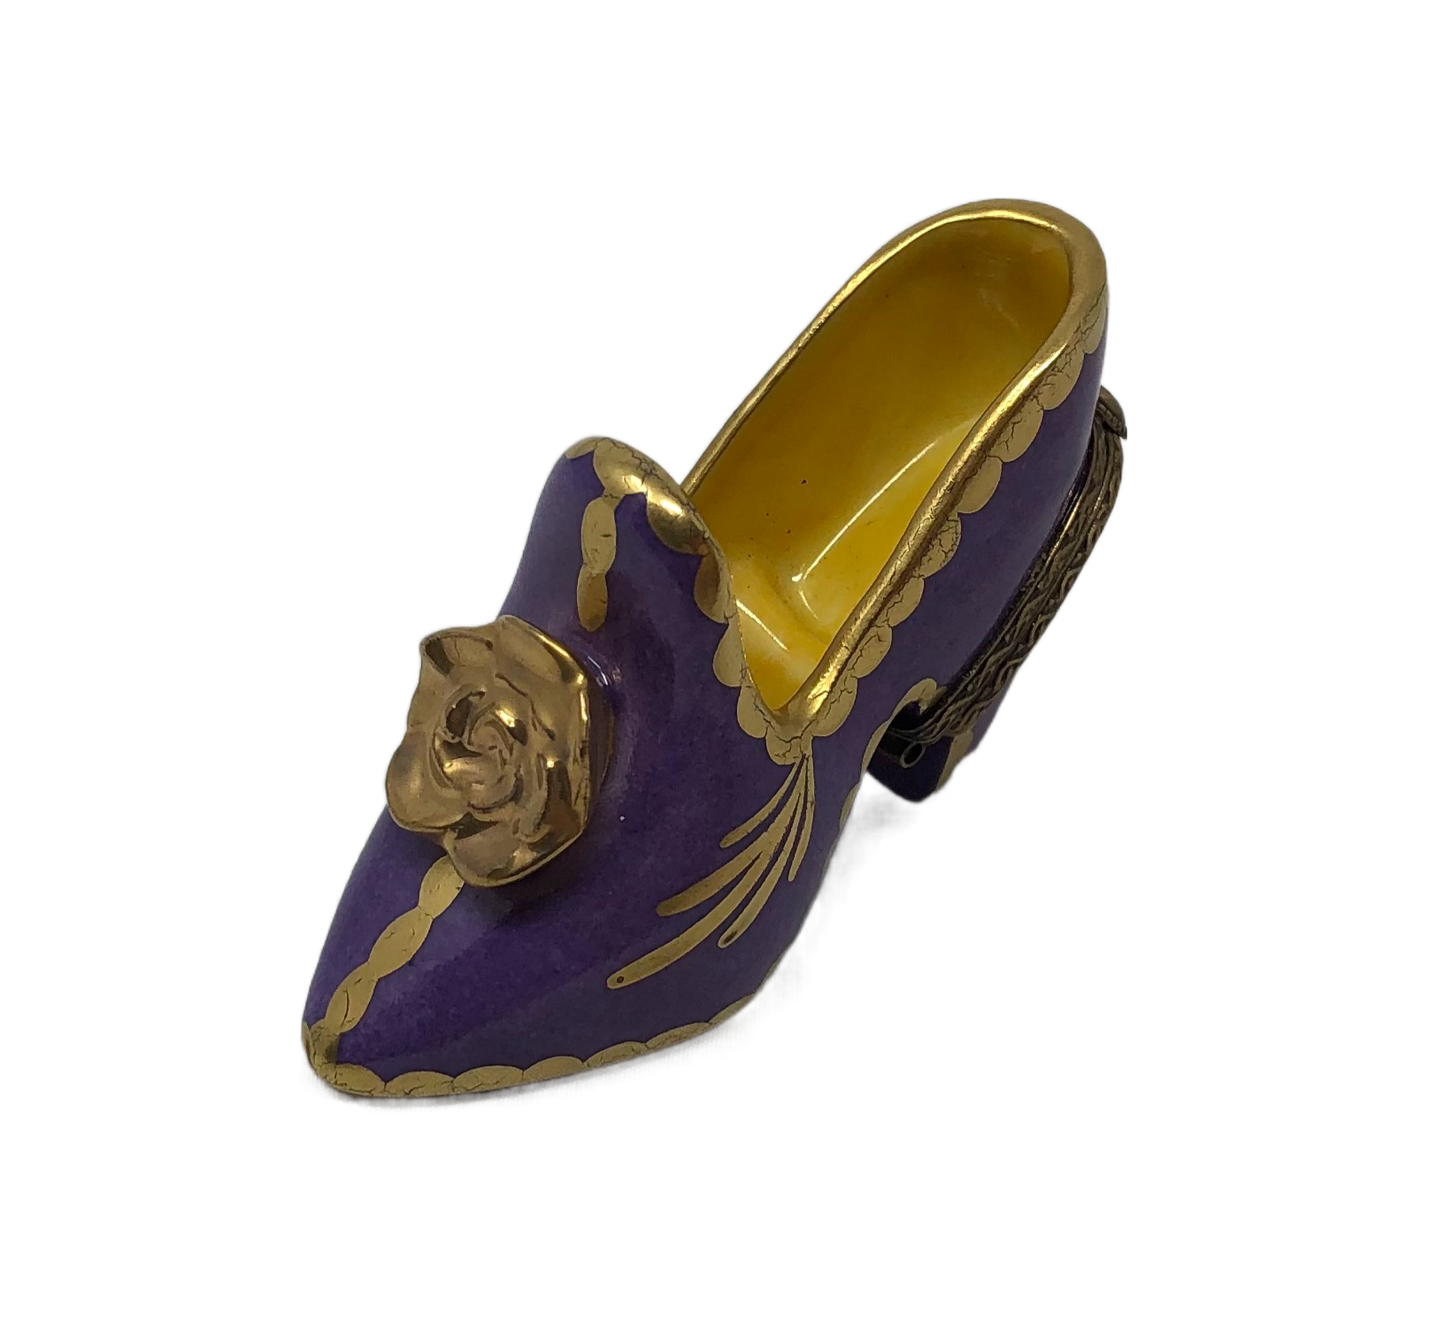 Regal Blossom: Purple and Gold Limoges Shoe Box